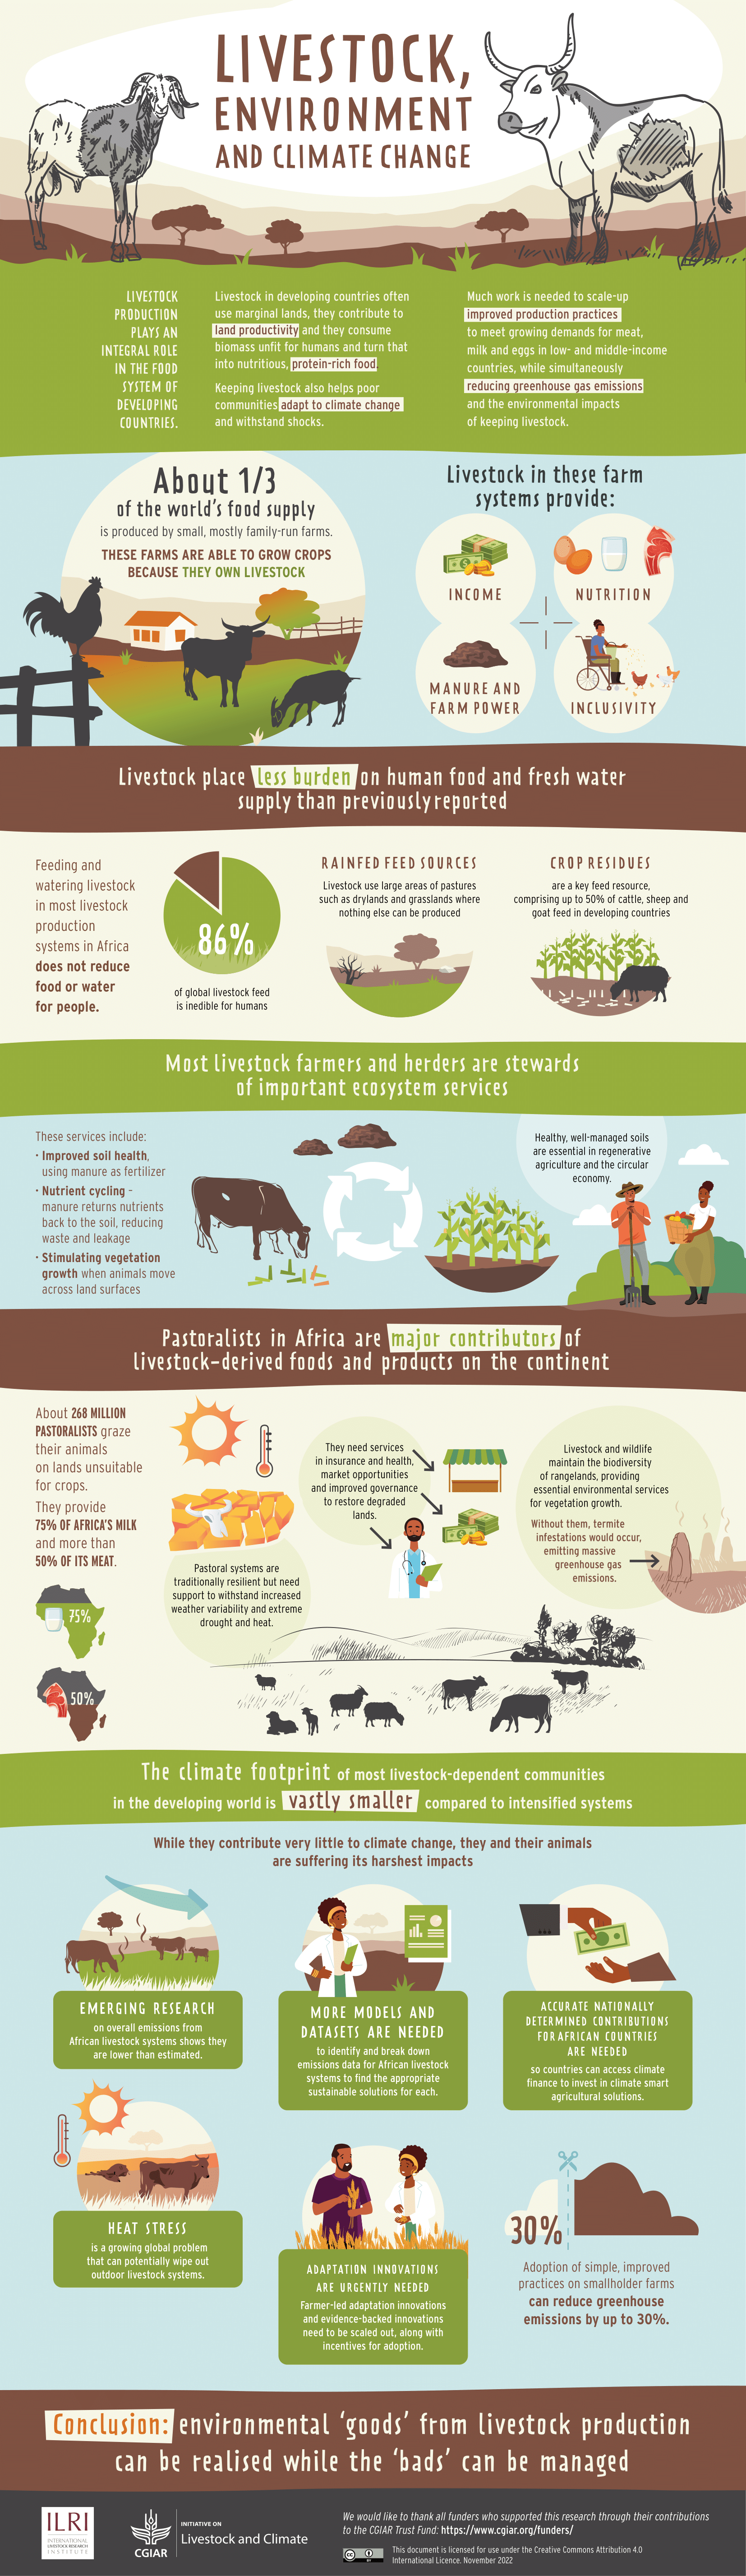 Infographic showing livestock, environment and climate change messages